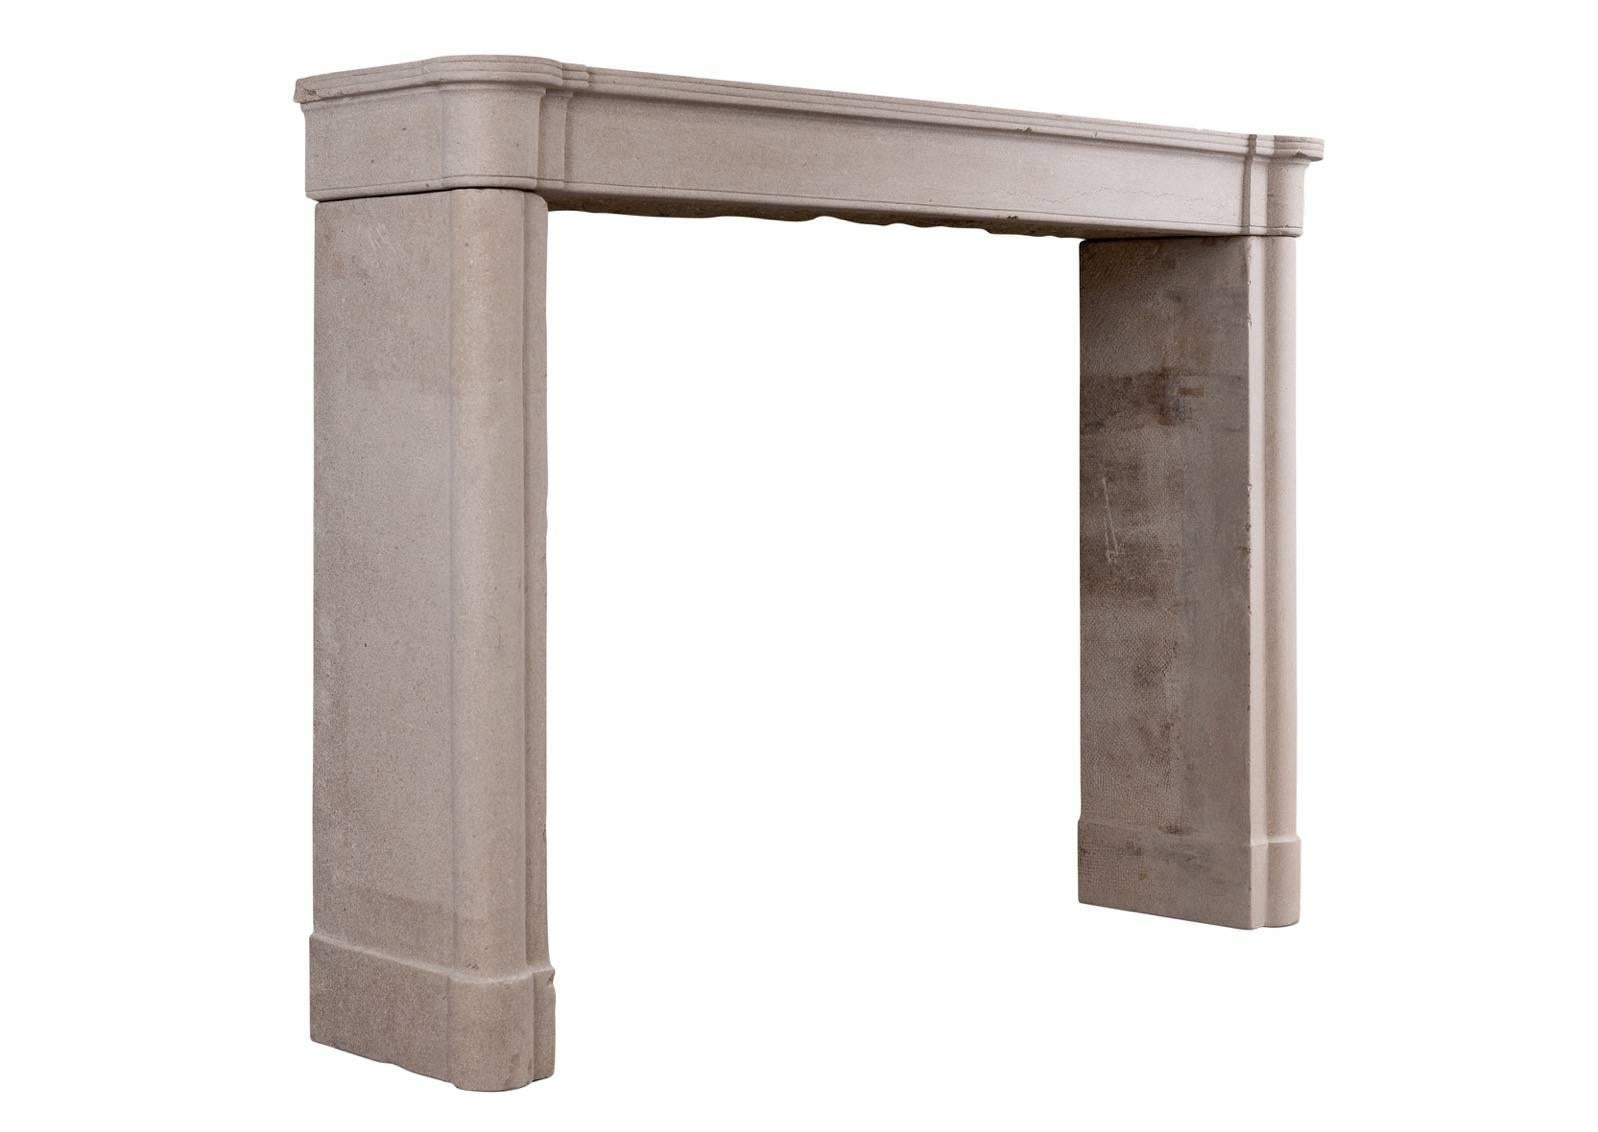 A small, well proportioned French stone Directoire fireplace. The jambs with half round columns surmounted by plain frieze and reeded shelf, circa 1800.

Measurements:
Shelf width: 1370 mm / 53 7/8 in
Overall height: 1005 mm / 39 5/8 in
Opening